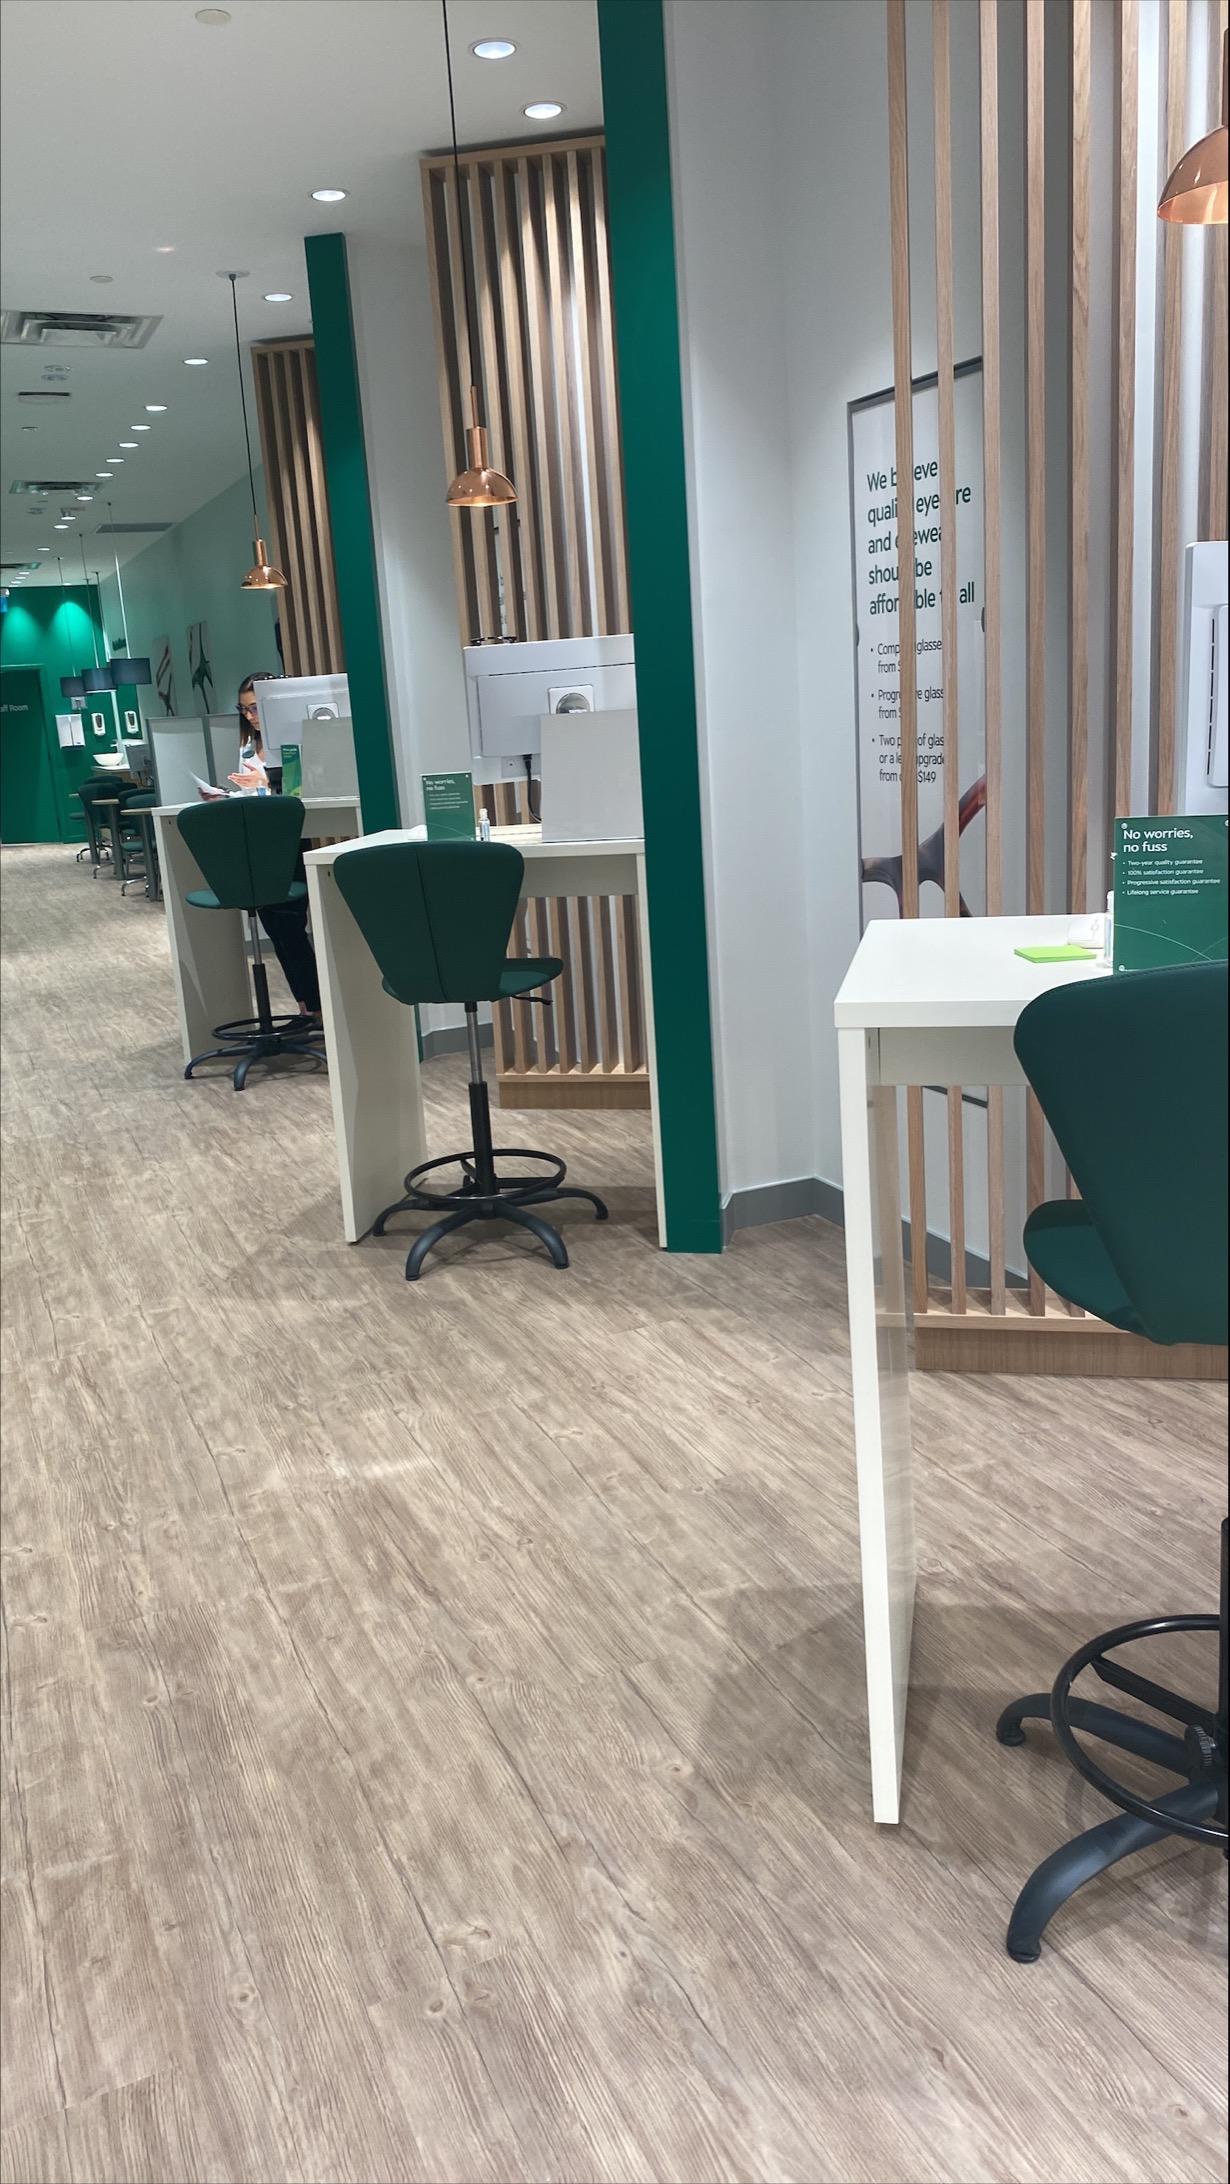 Images Specsavers West Edmonton Mall